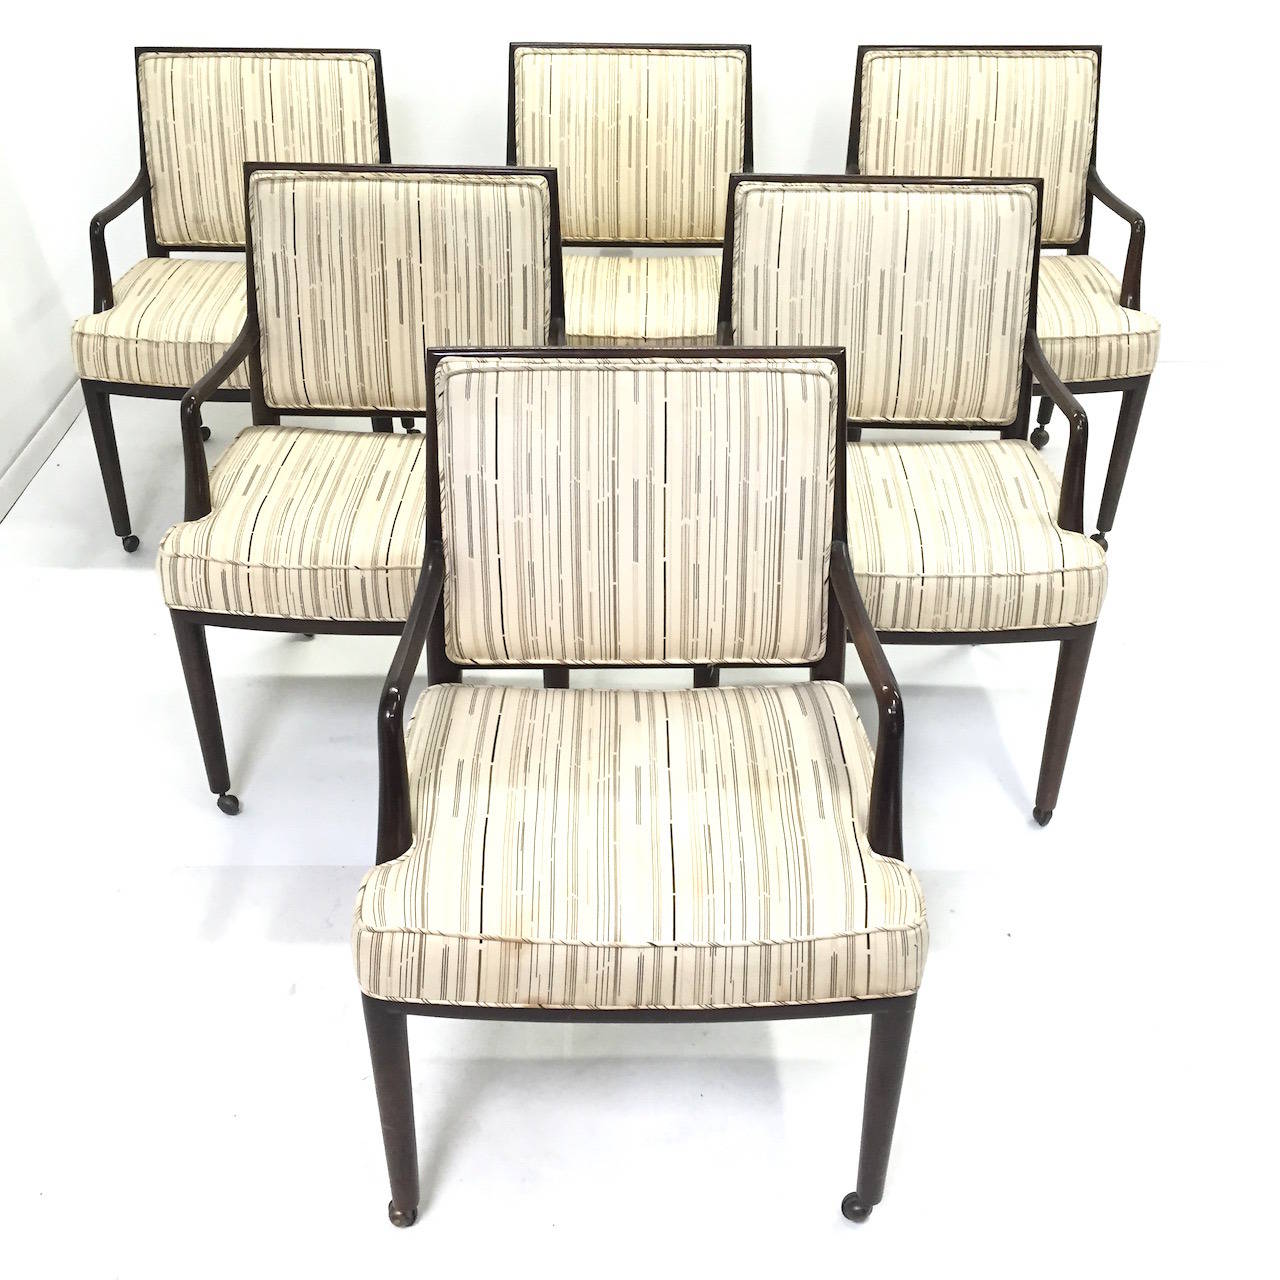 Beautiful Set of 6 Monteverdi Young Dining Chairs.  Very nice original condition.  Upholstery should be changed to match your decor.  Sold in as found condition for reupholstery.  Some of the casters have been replaced, 2 casters need to be replaced.